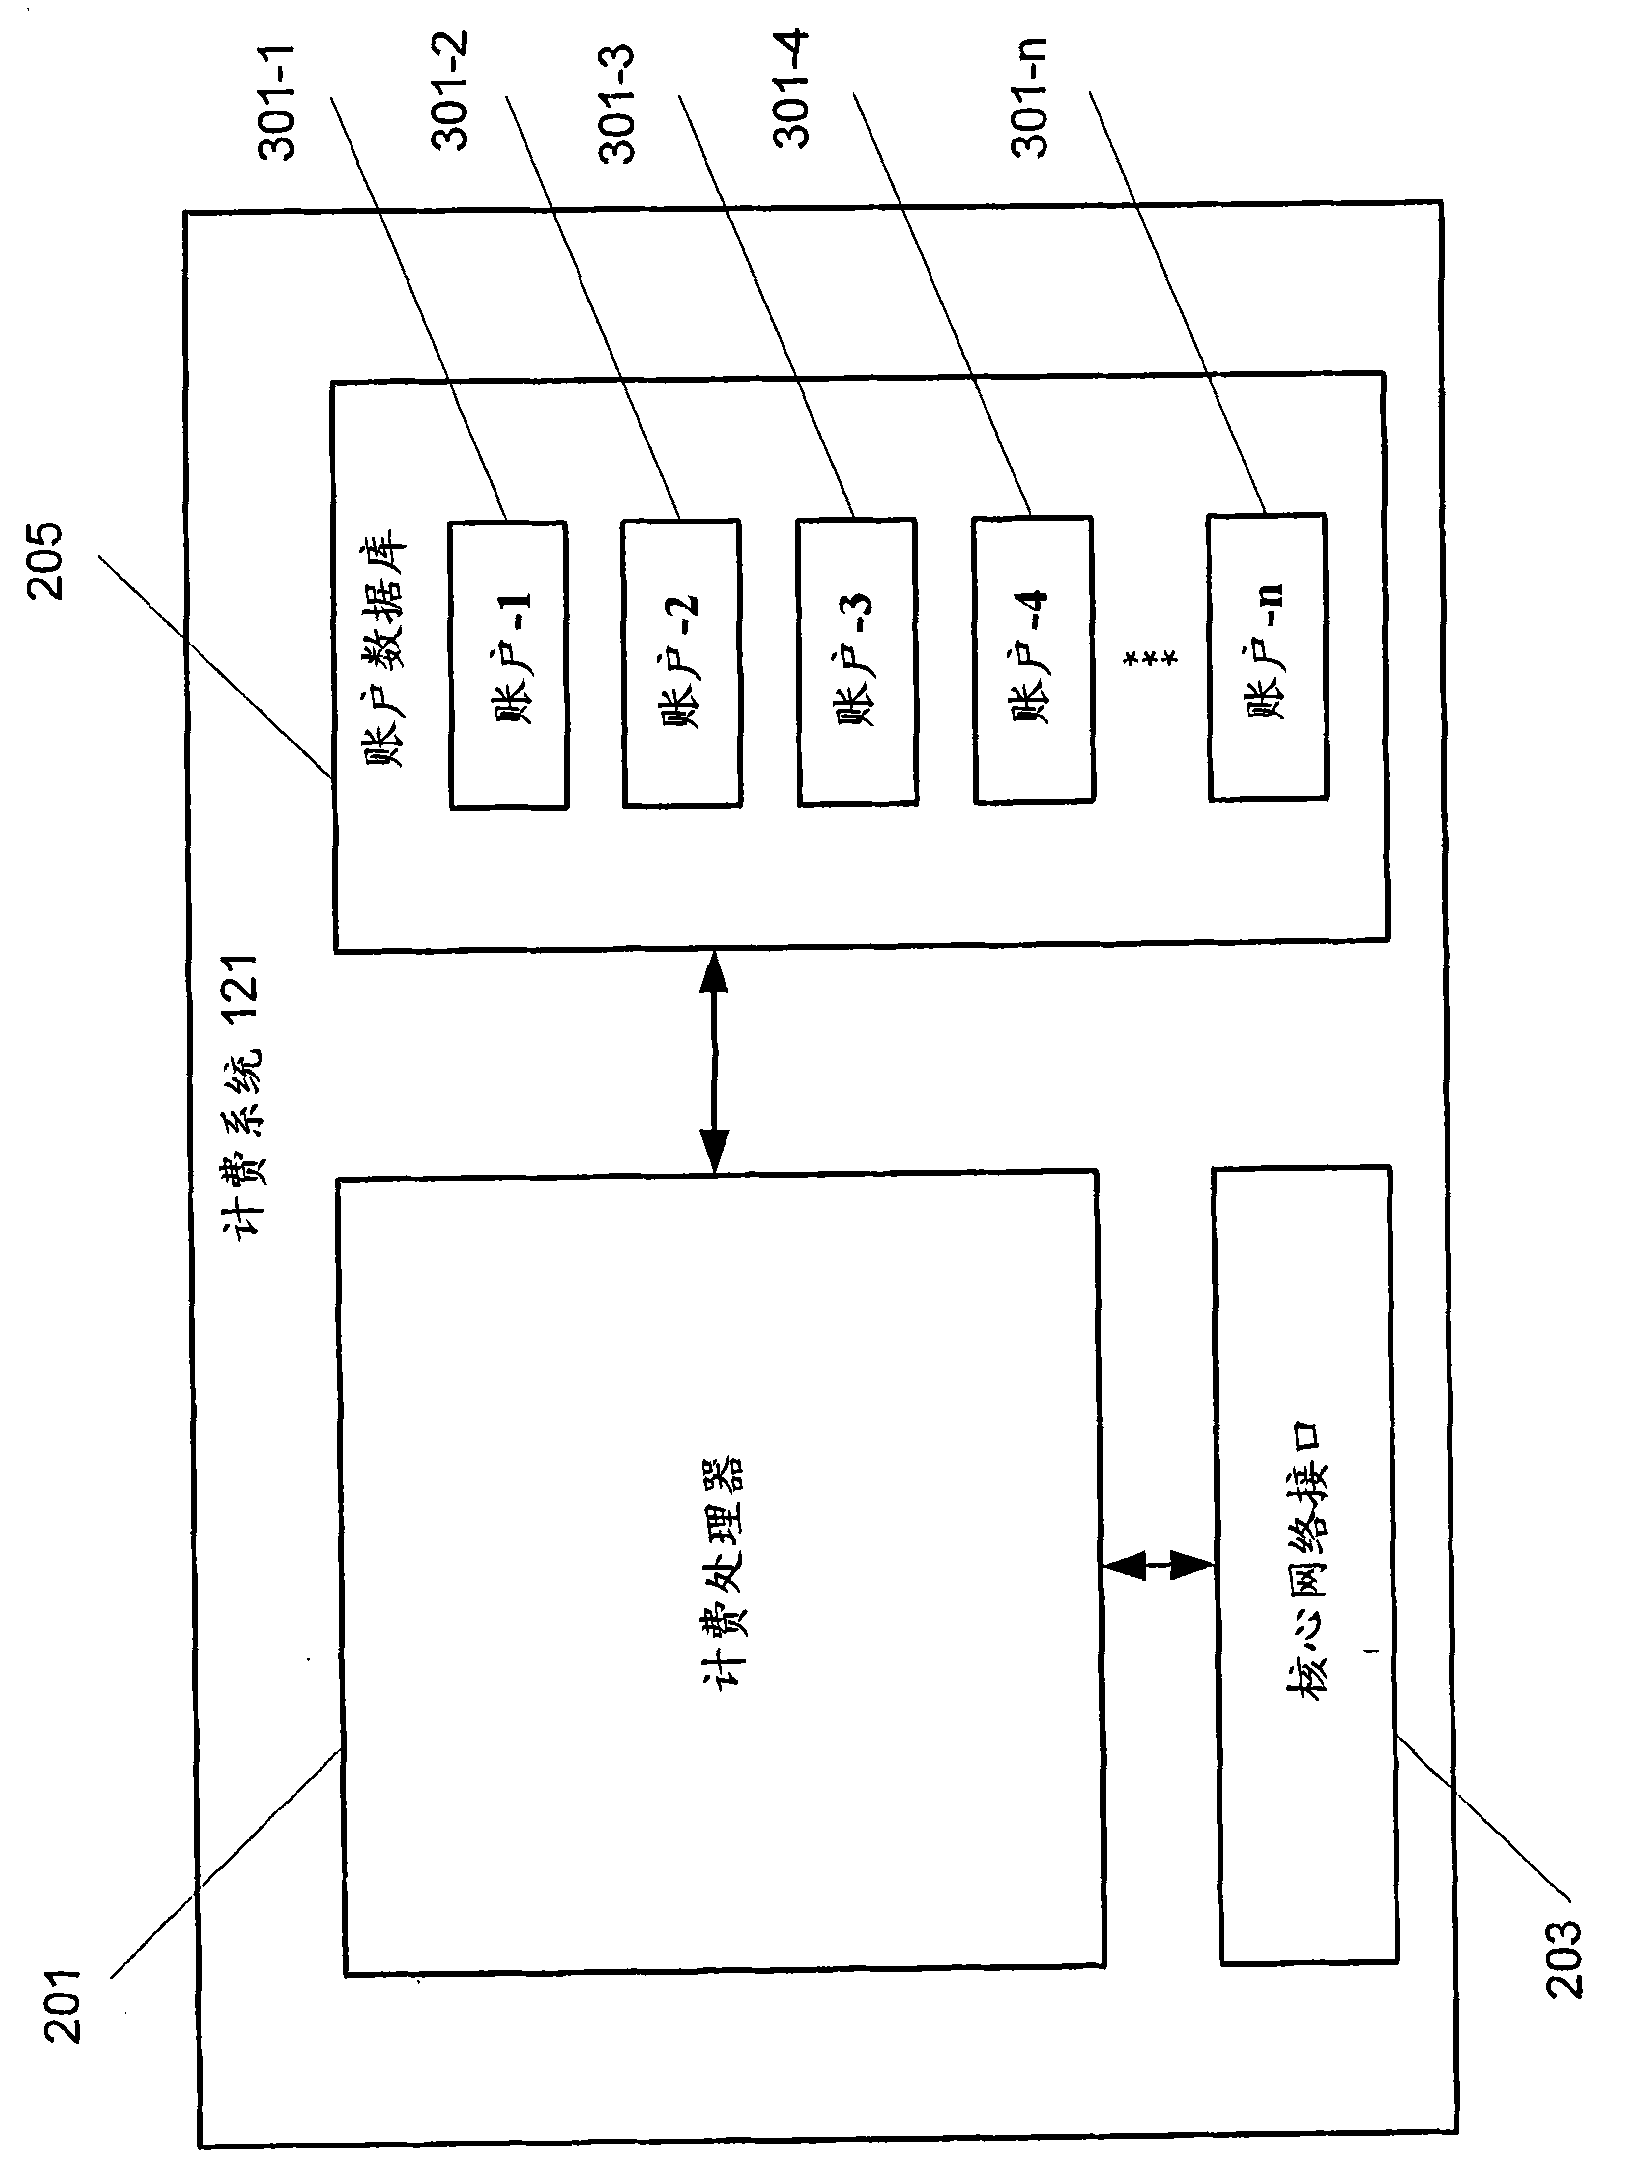 Methods of providing communication services including account balance sharing and related charging systems